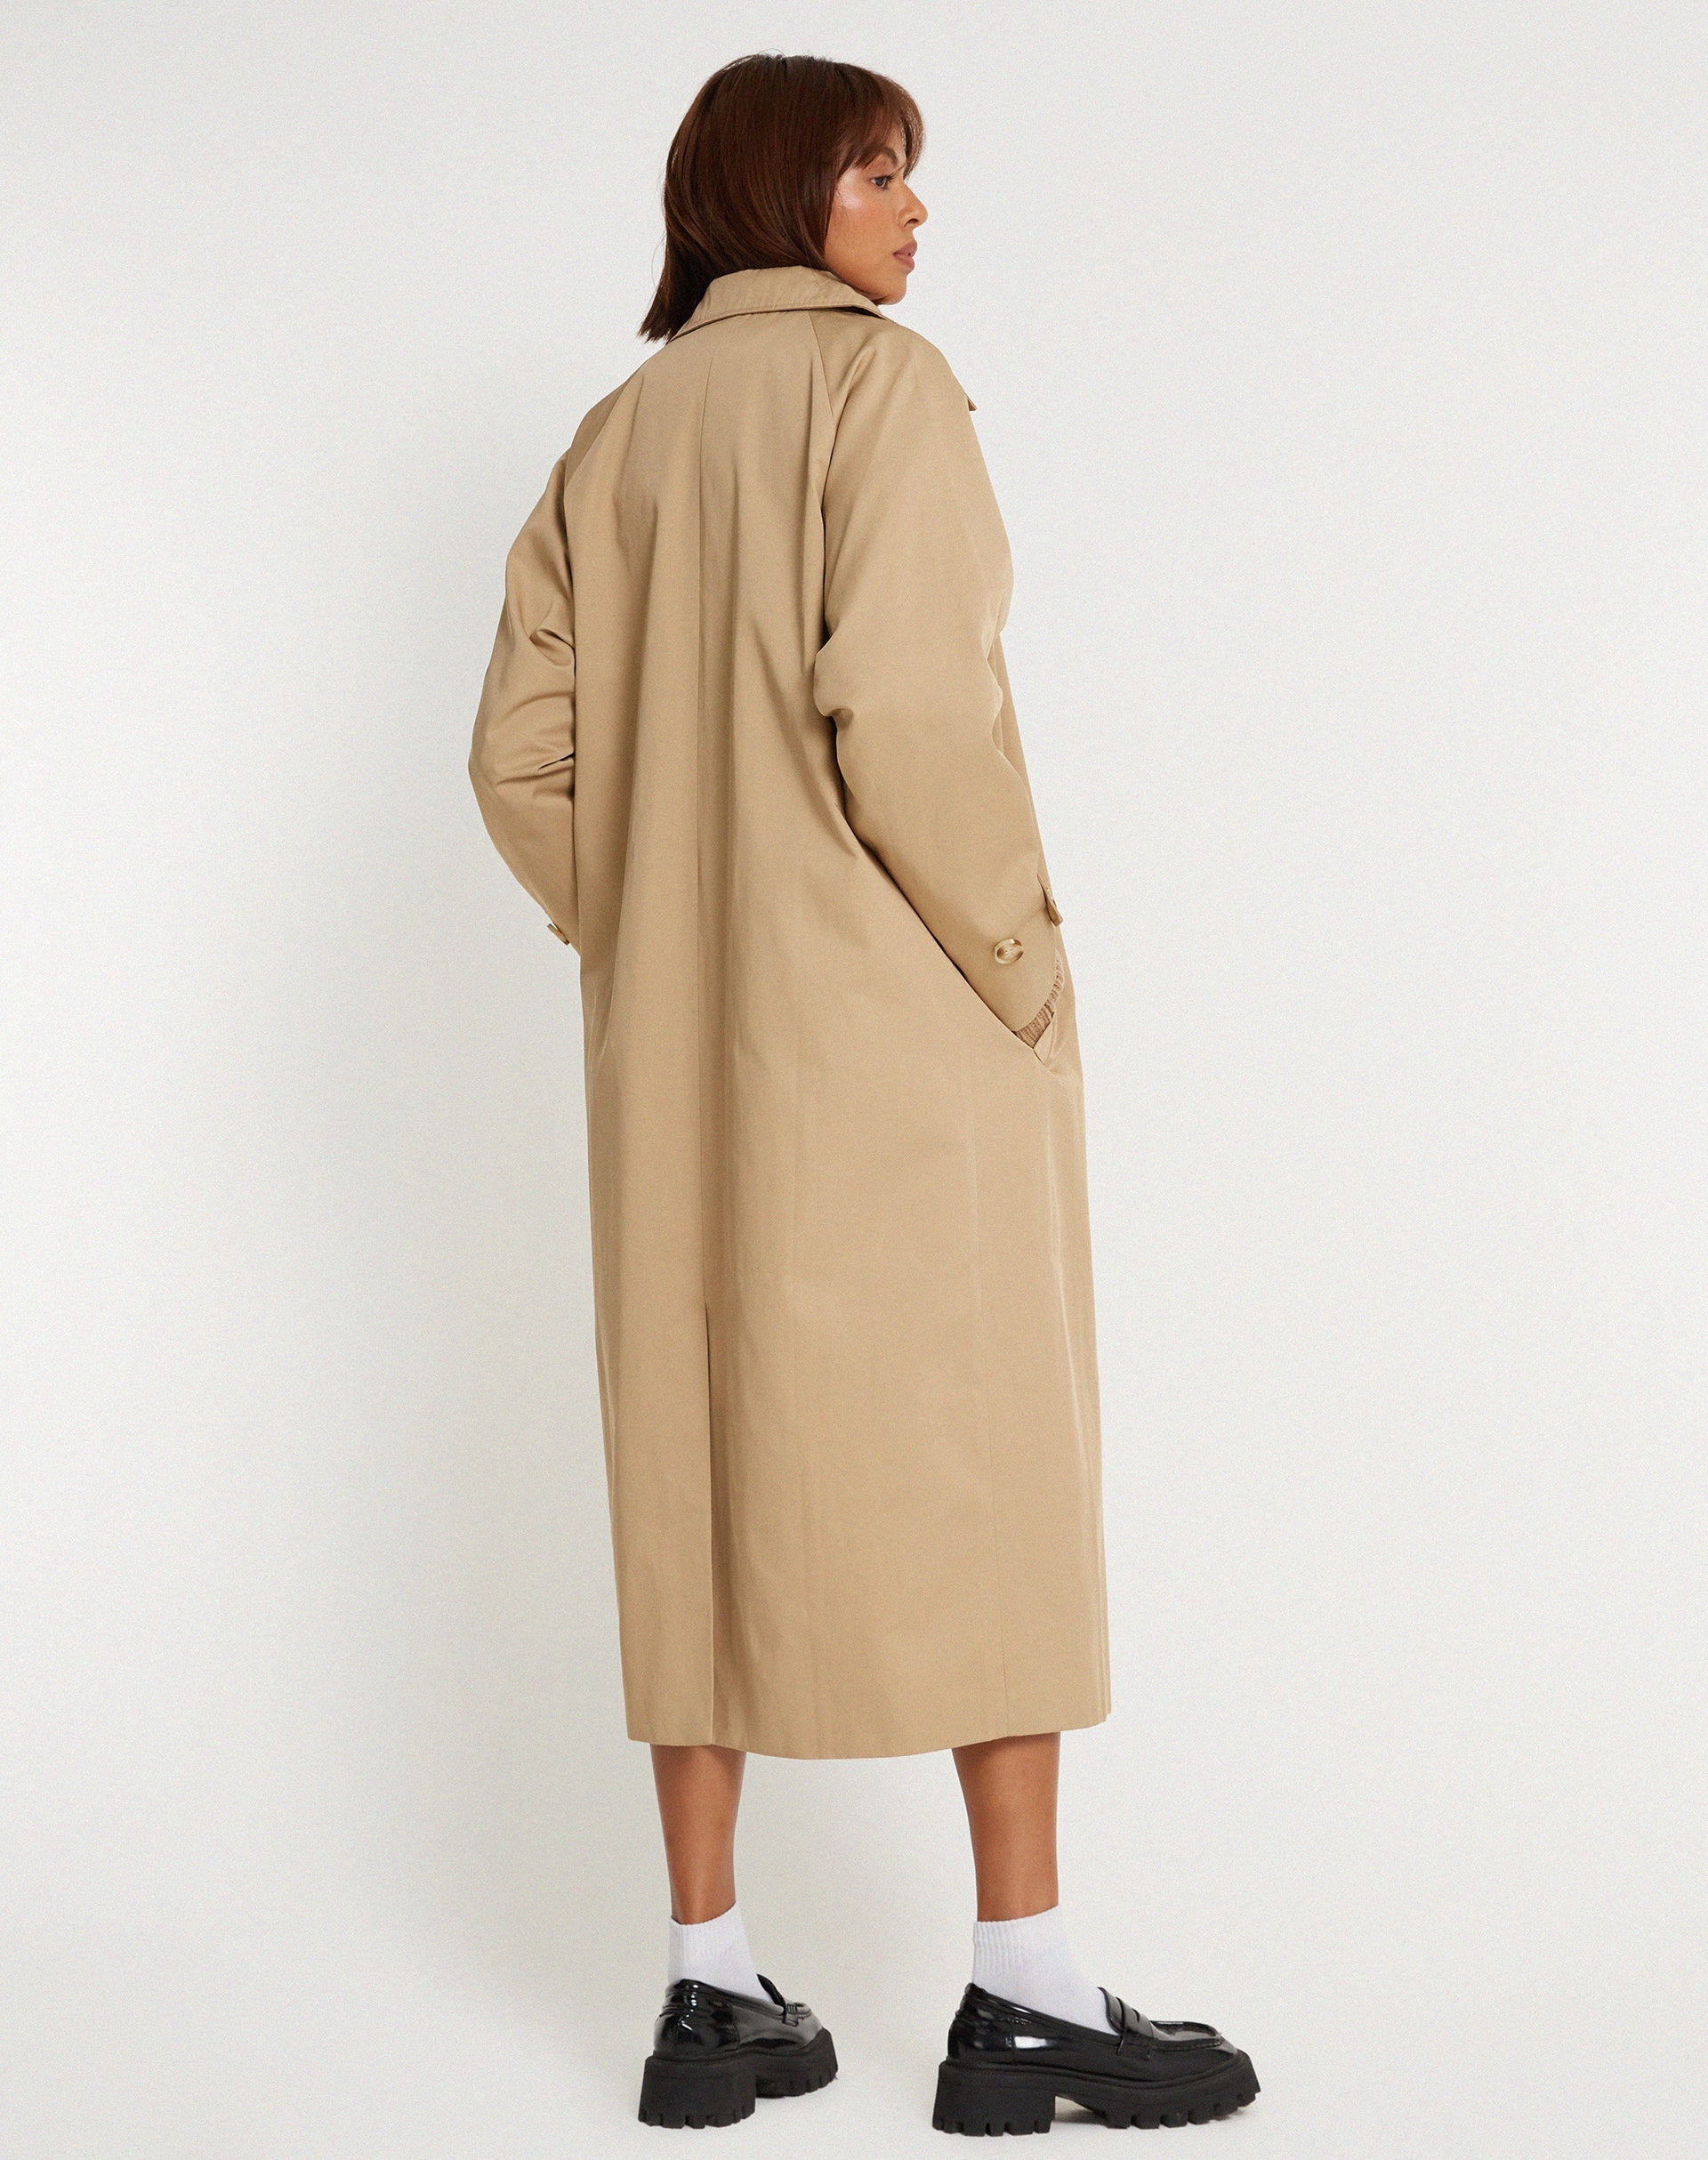 image of Assa Trench Coat in Tan with Stripe Lining